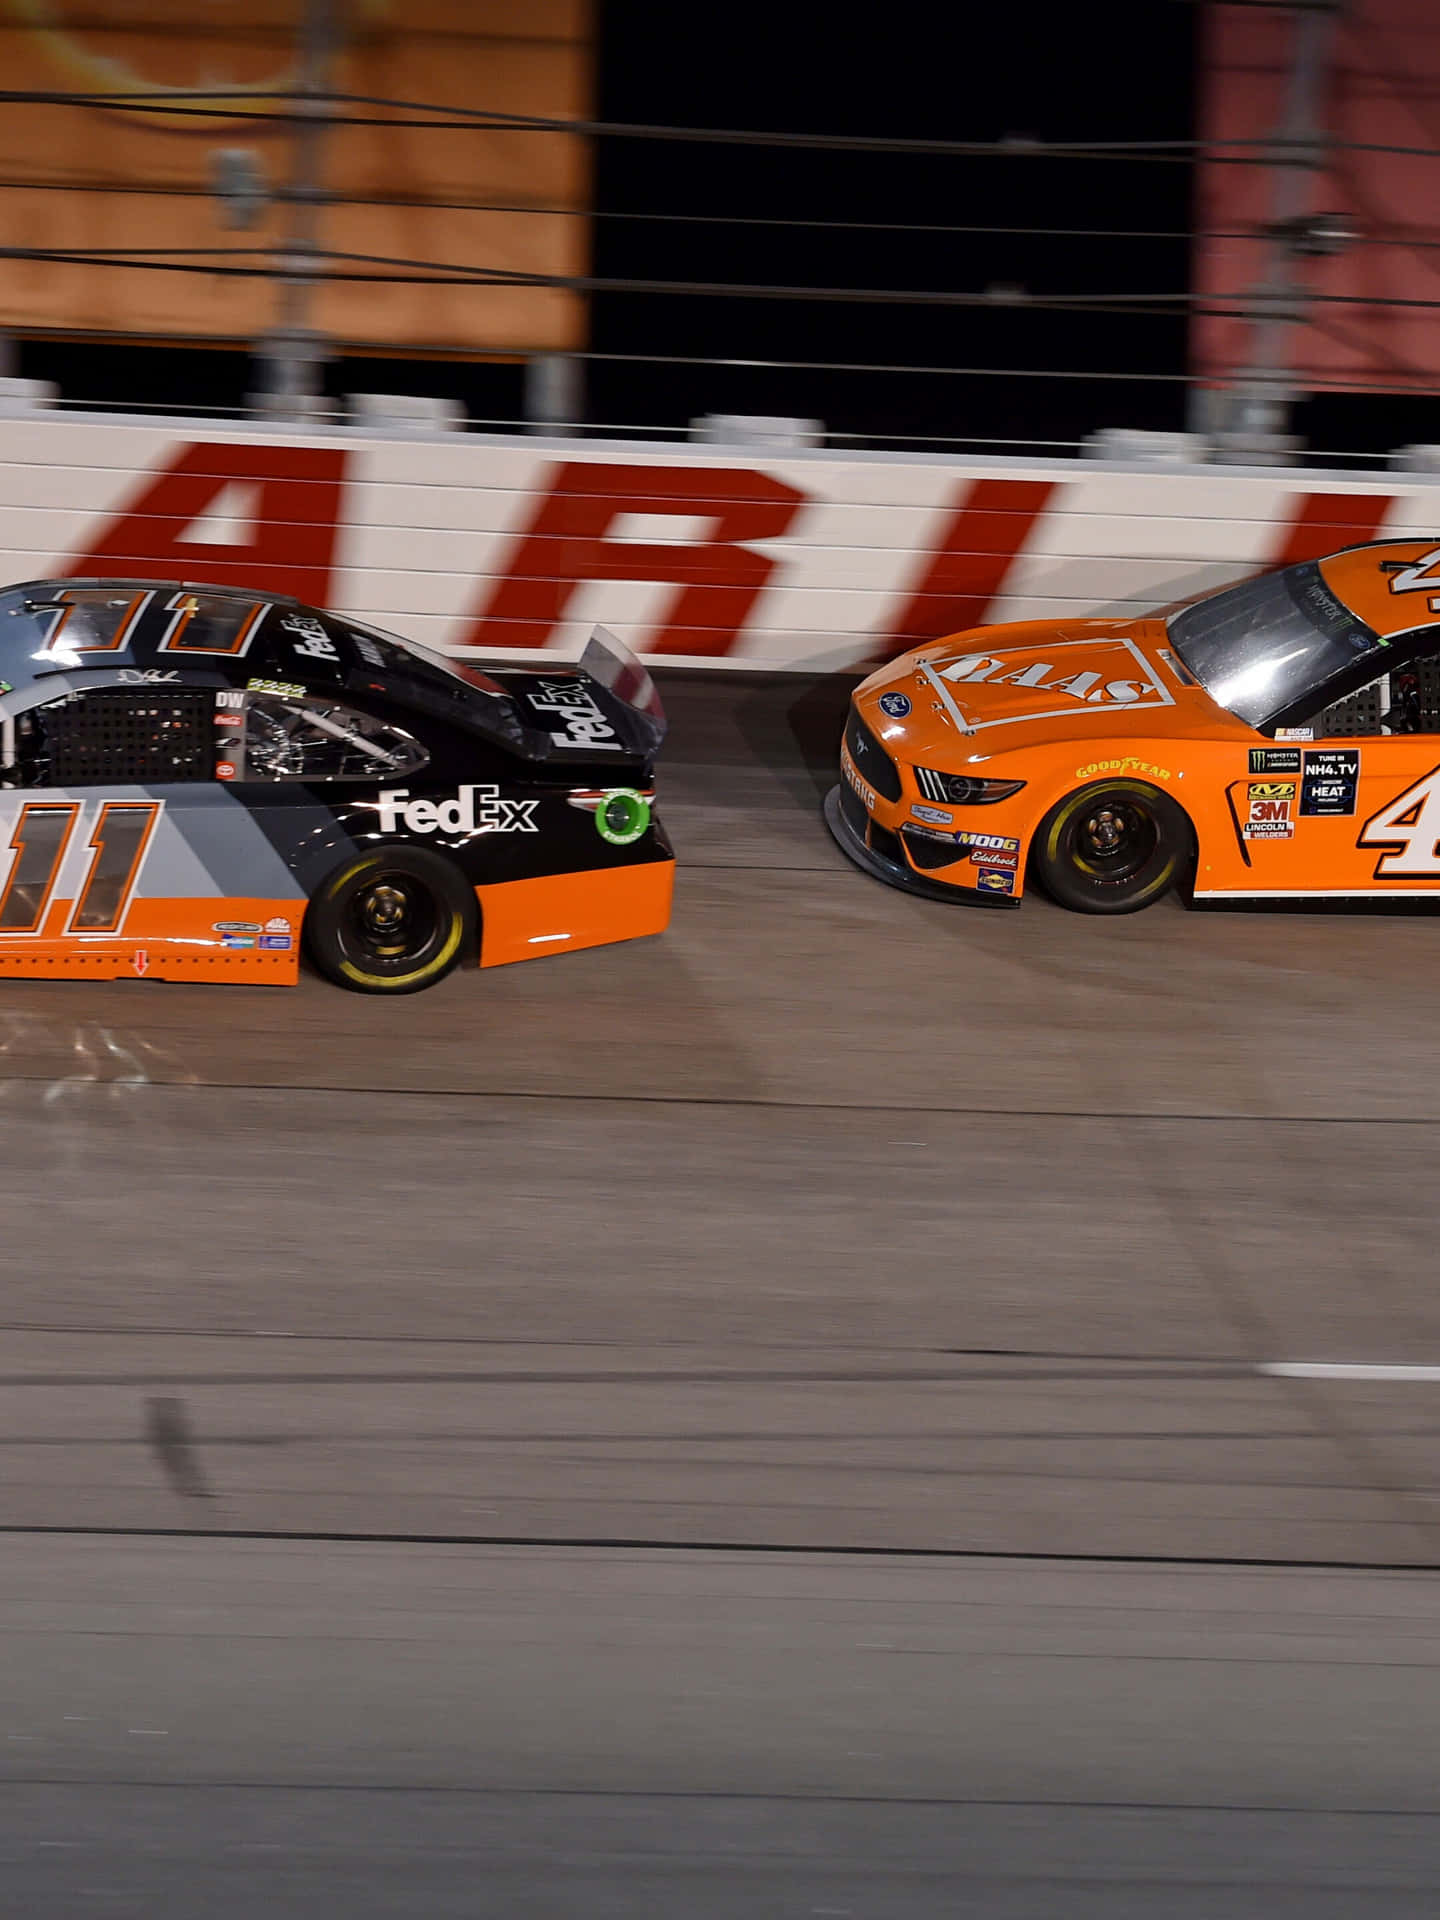 Feel the Thrills of NASCAR Racing with an iPhone Wallpaper